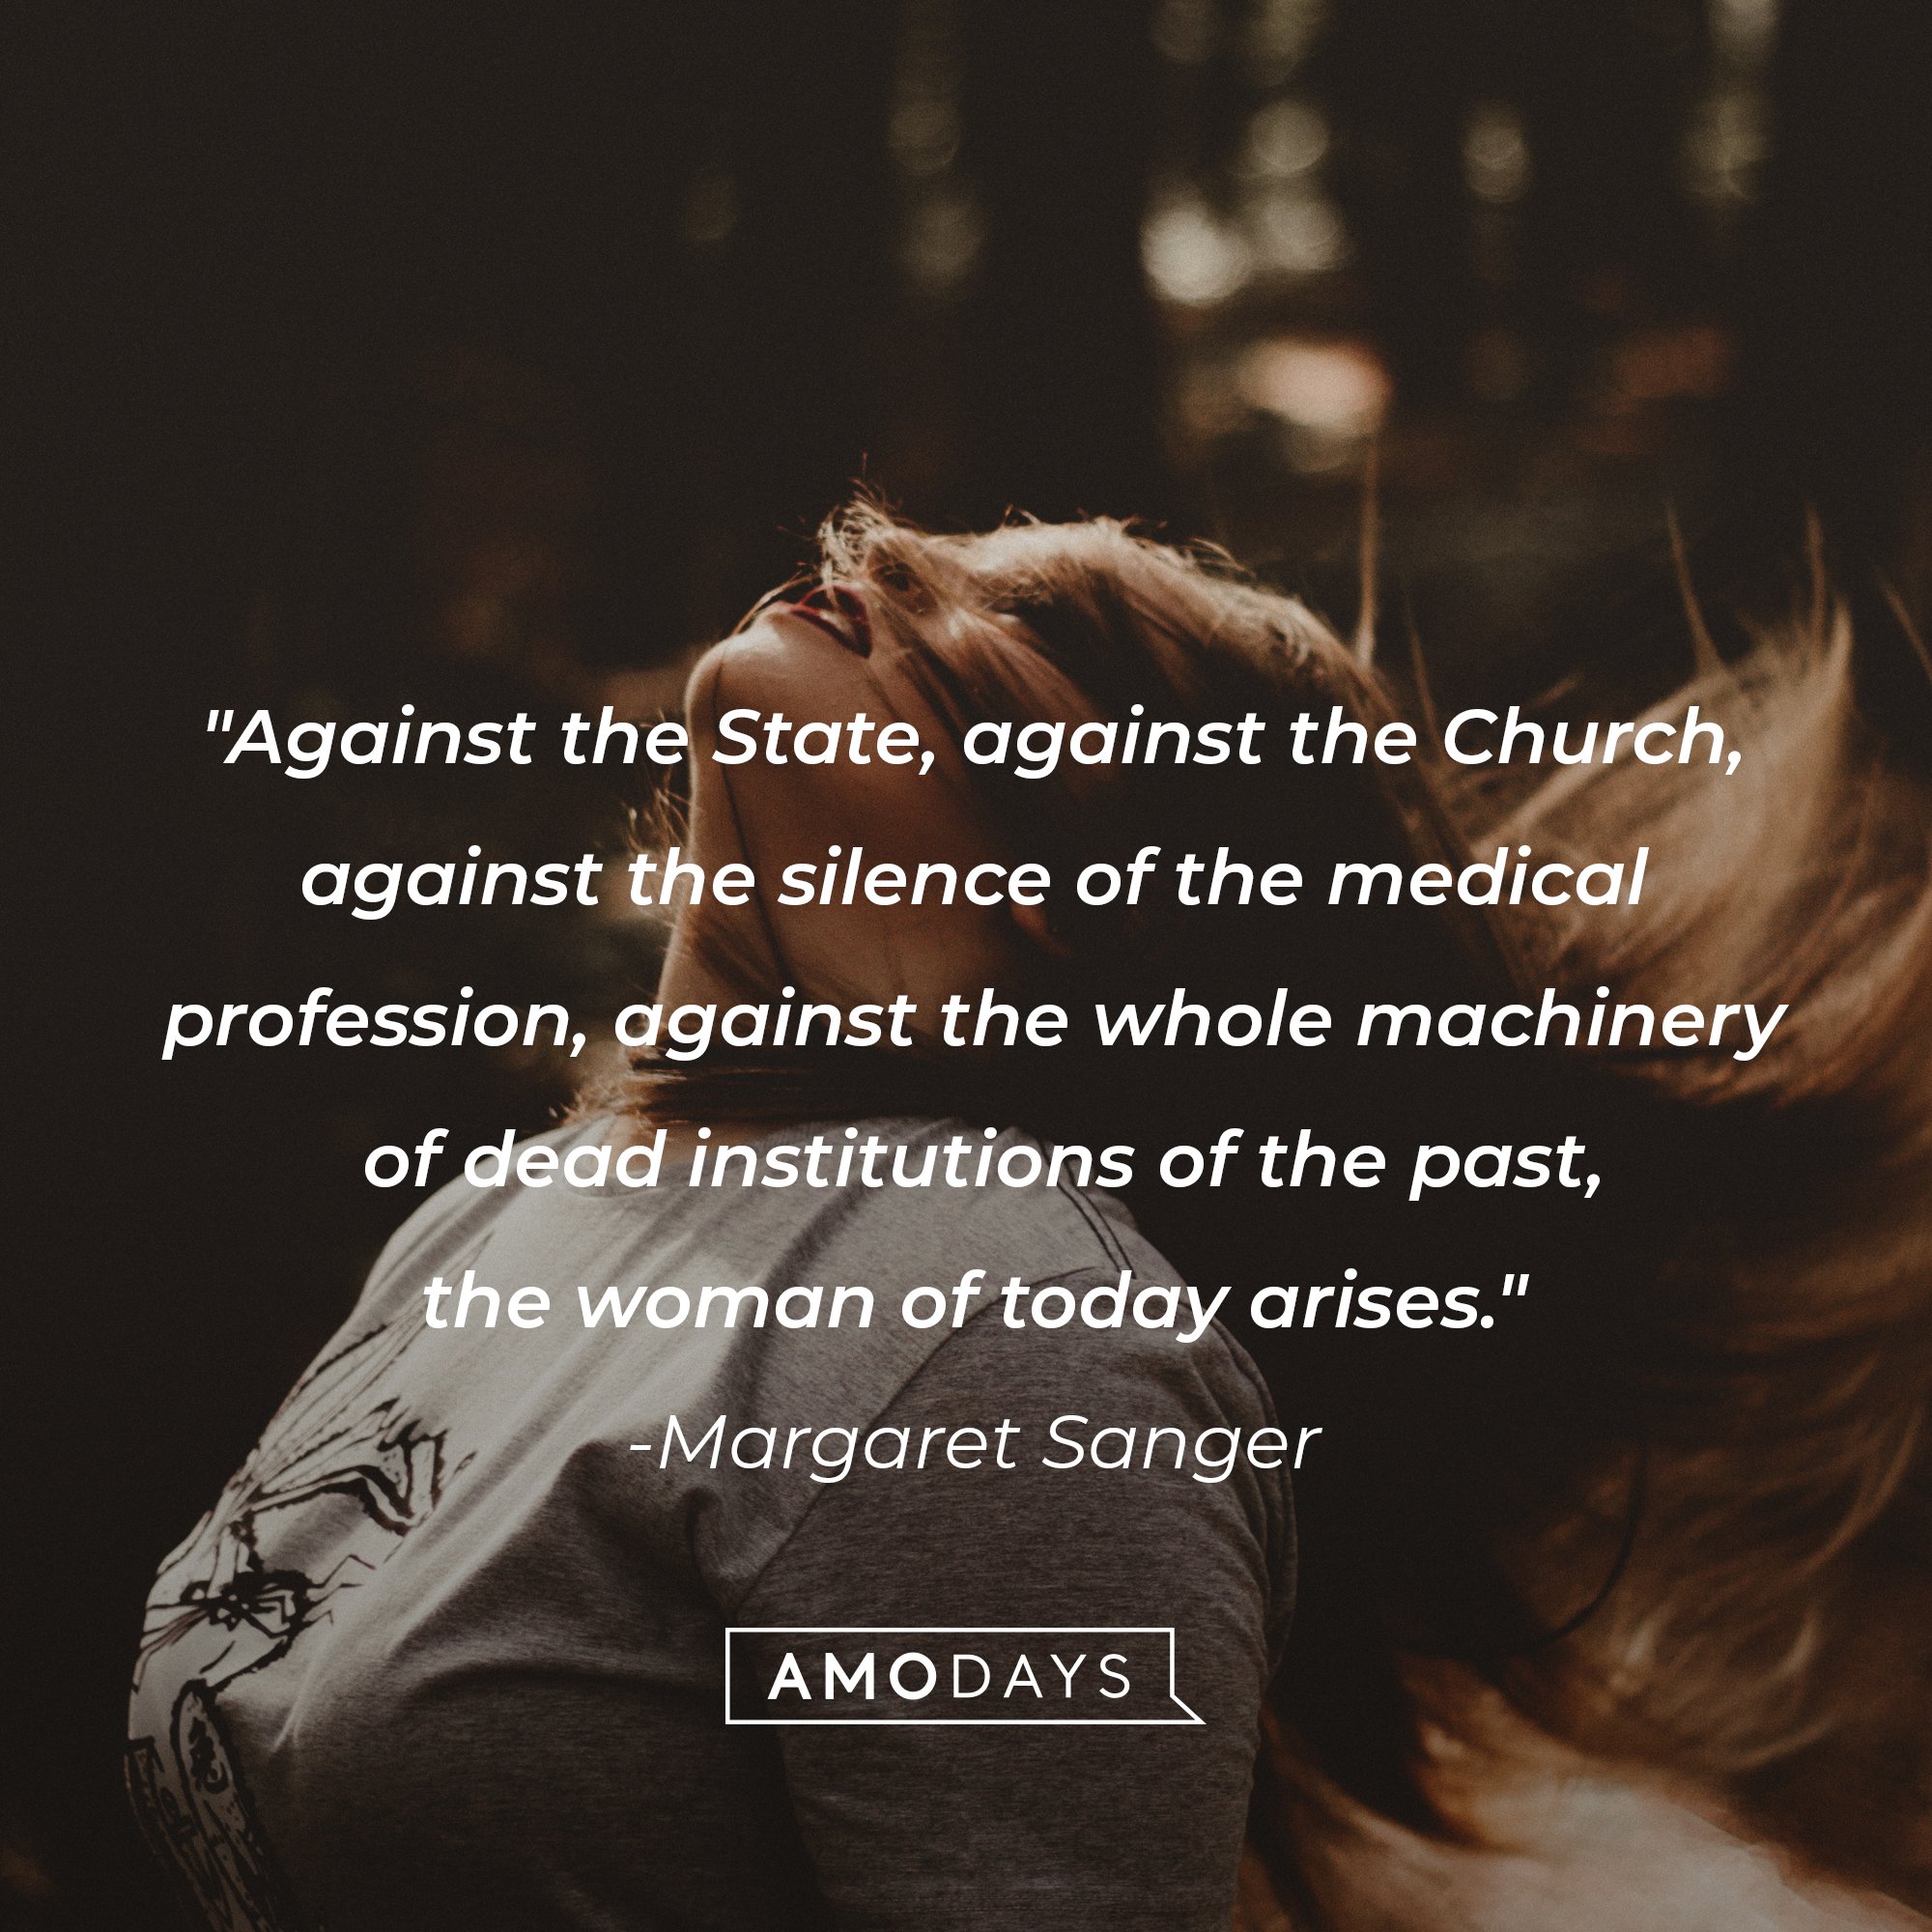 Margaret Sang’s quote: "Against the State, against the Church, against the silence of the medical profession, against the whole machinery of dead institutions of the past, the woman of today arises." | Image: AmoDays 